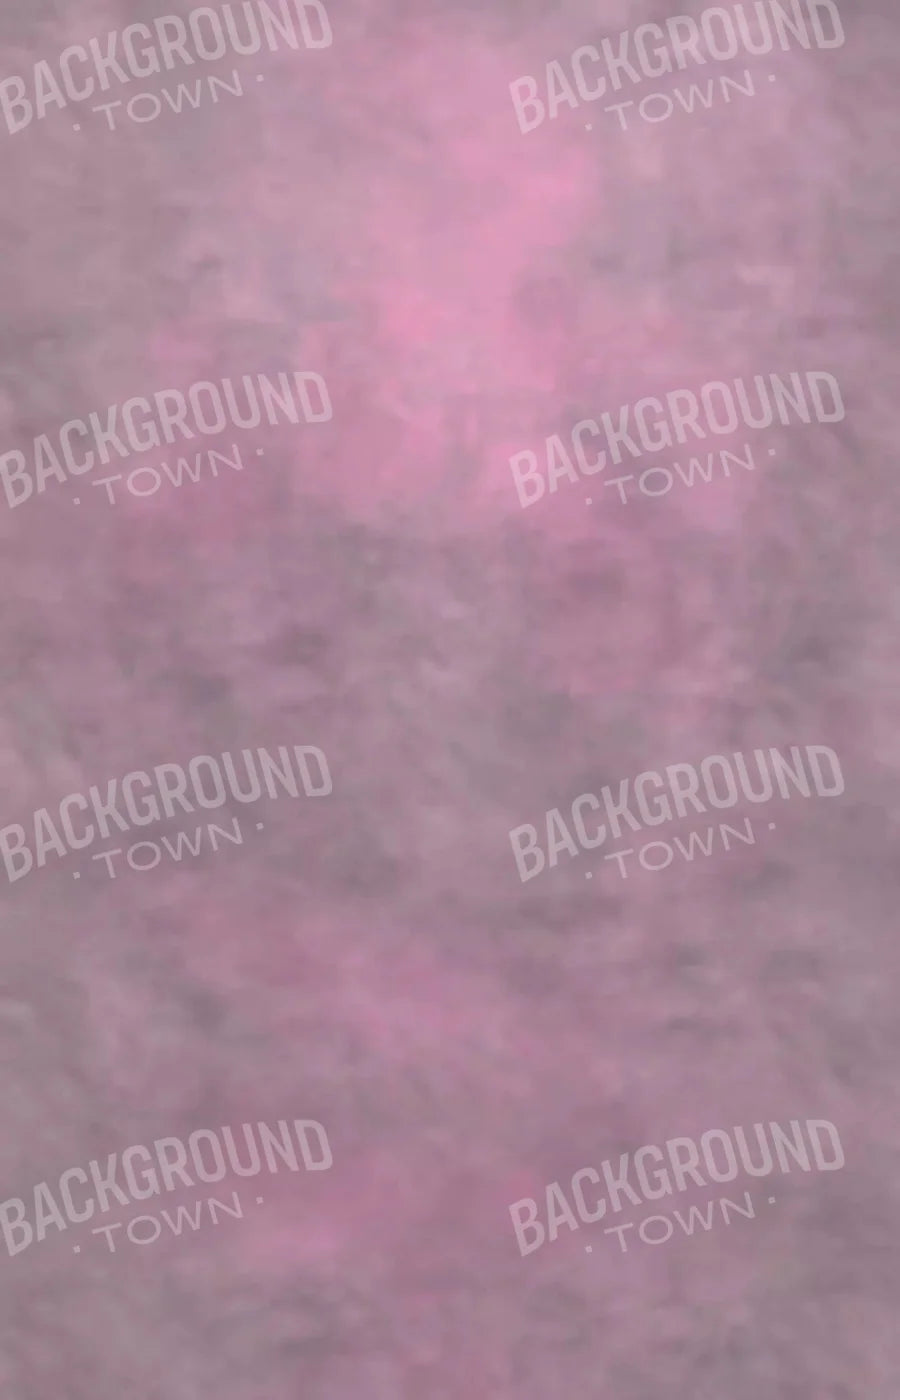 Cotton Candy 8X12 Ultracloth ( 96 X 144 Inch ) Backdrop